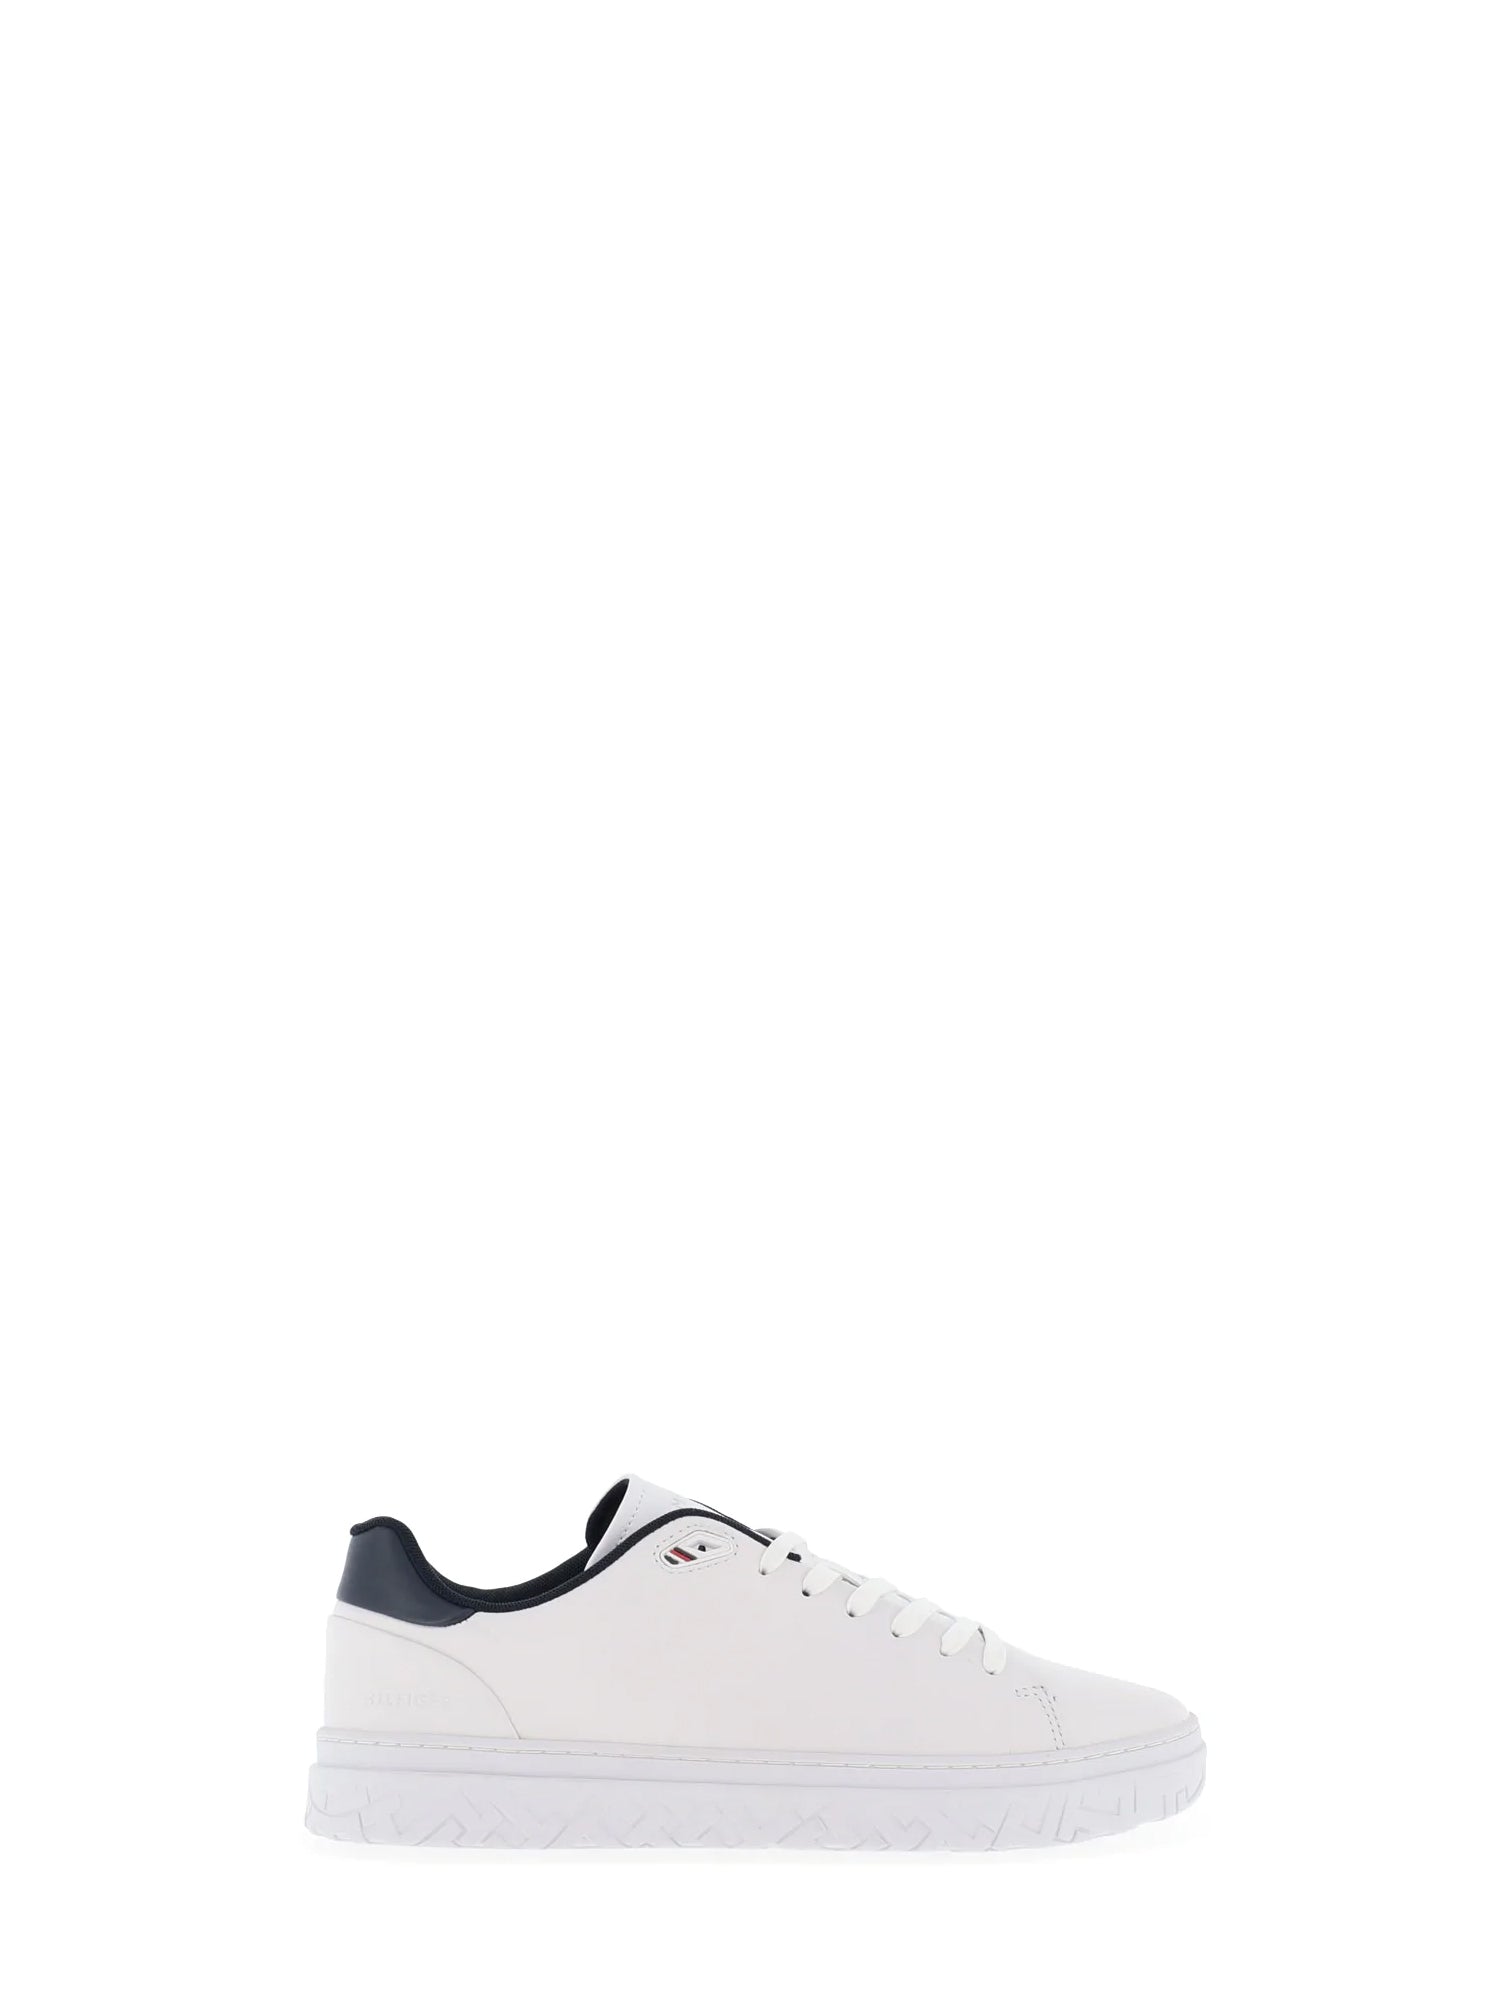 TOMMY HILFIGER SHOES SNEAKERS BASSE MODERN ICONIC COURT BIANCO